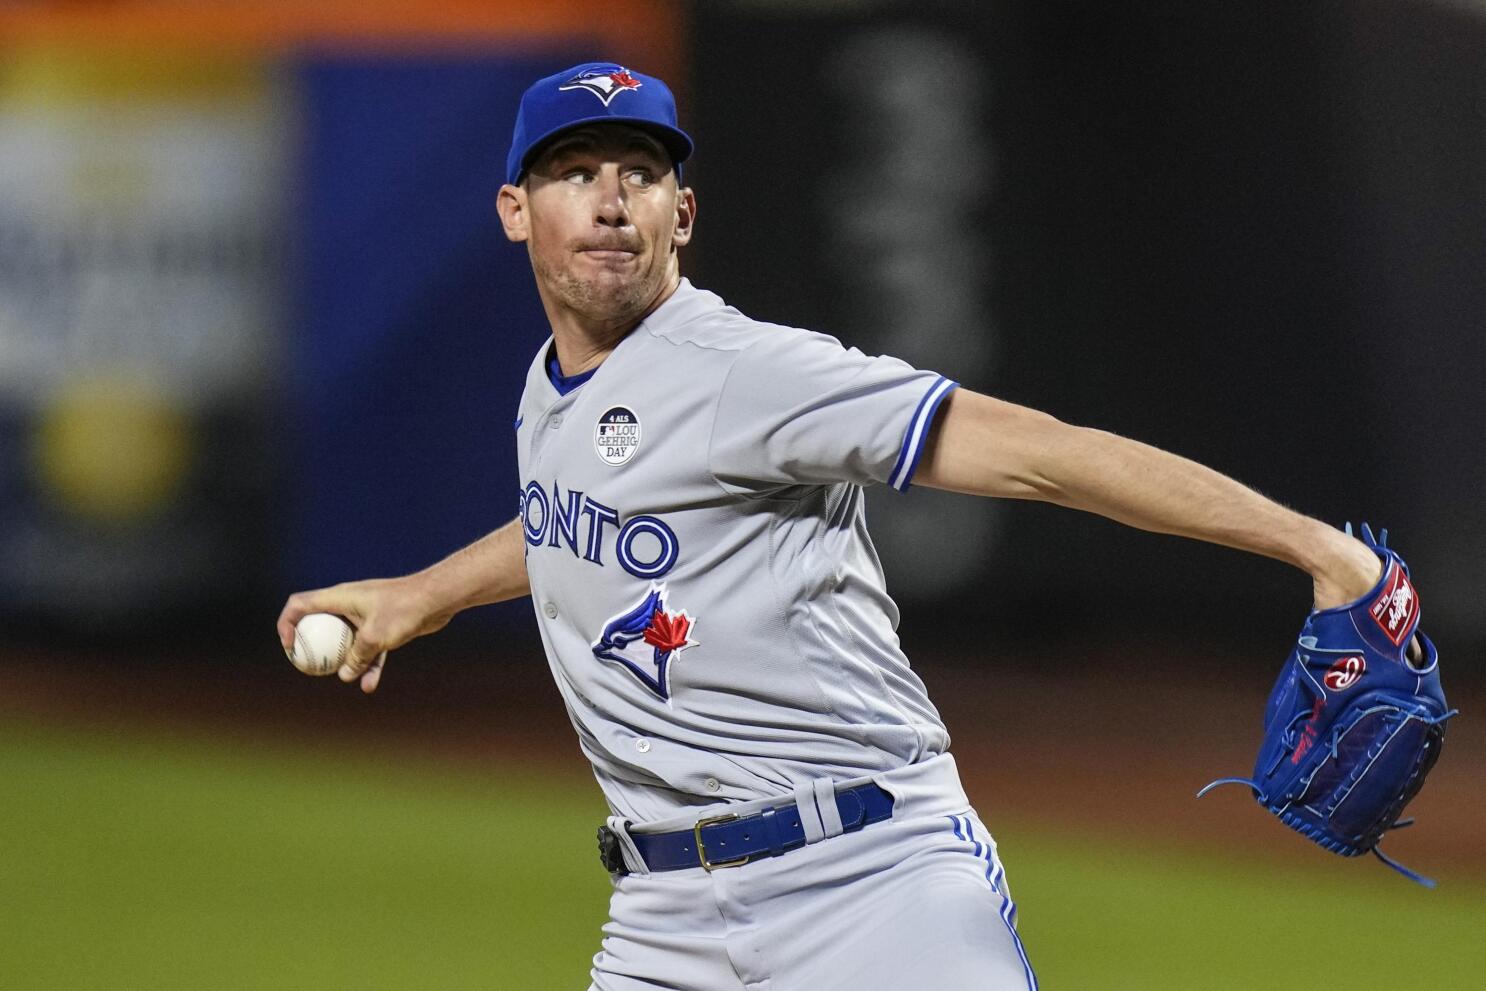 Dad-to-be Chris Bassitt pitches Blue Jays over Mets 3-0